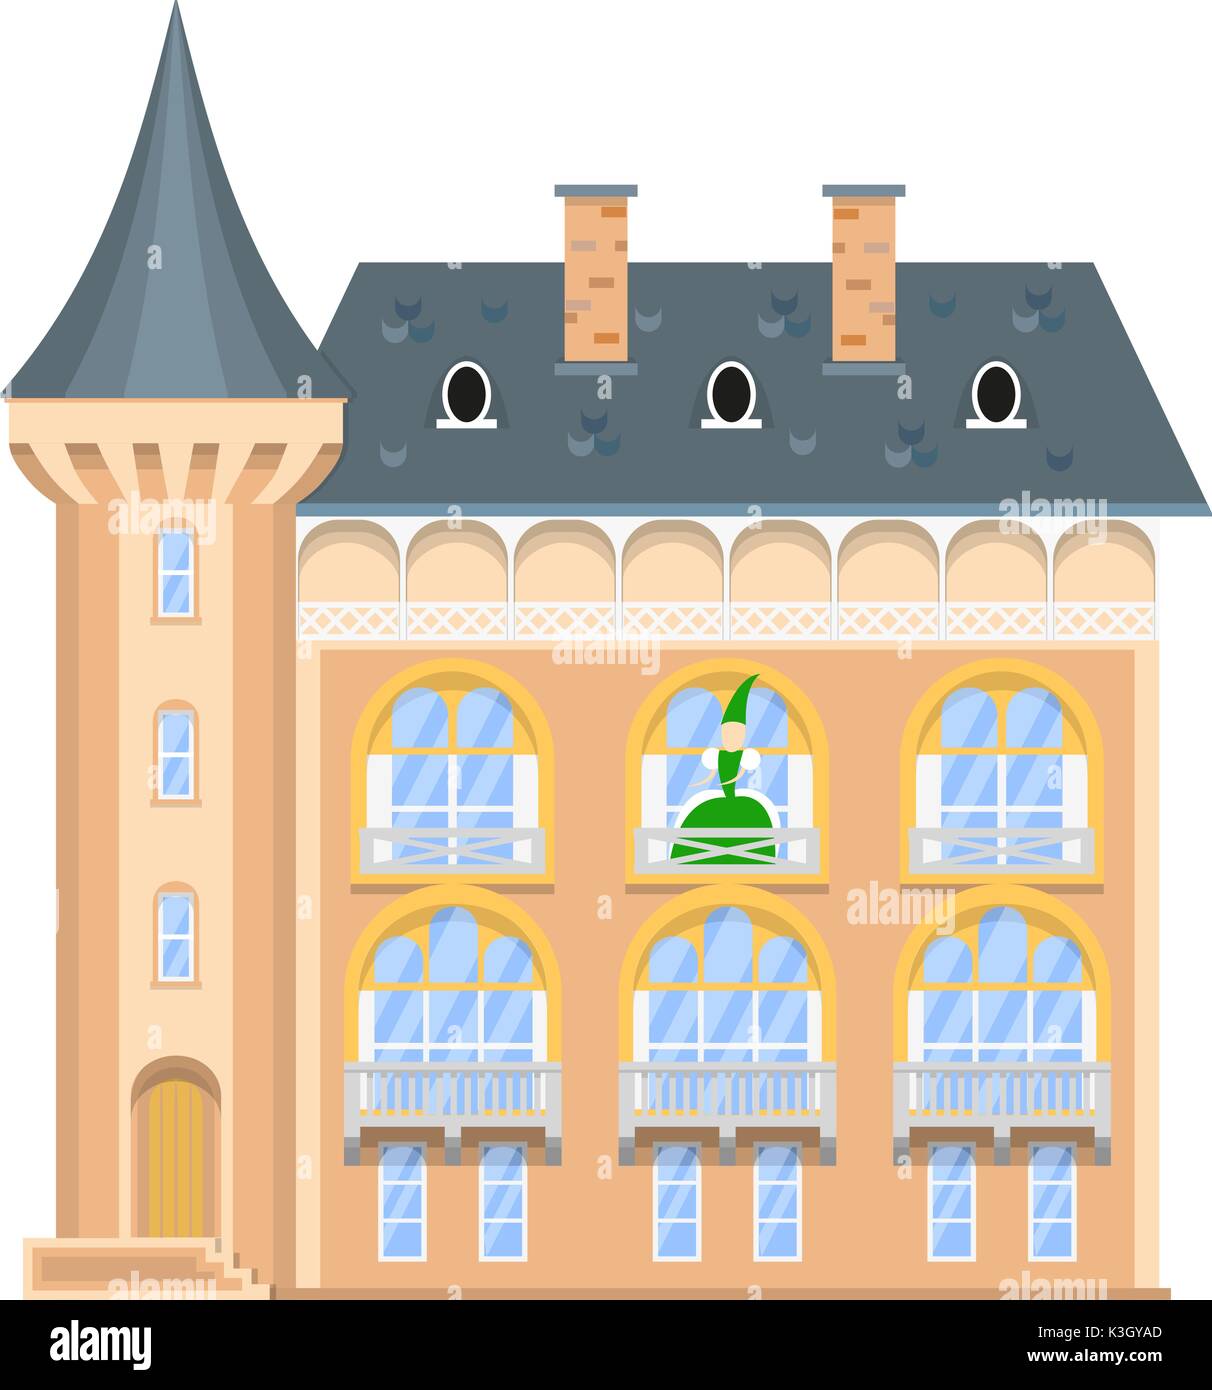 Princess on the balcony of a medieval castle. Stock Vector